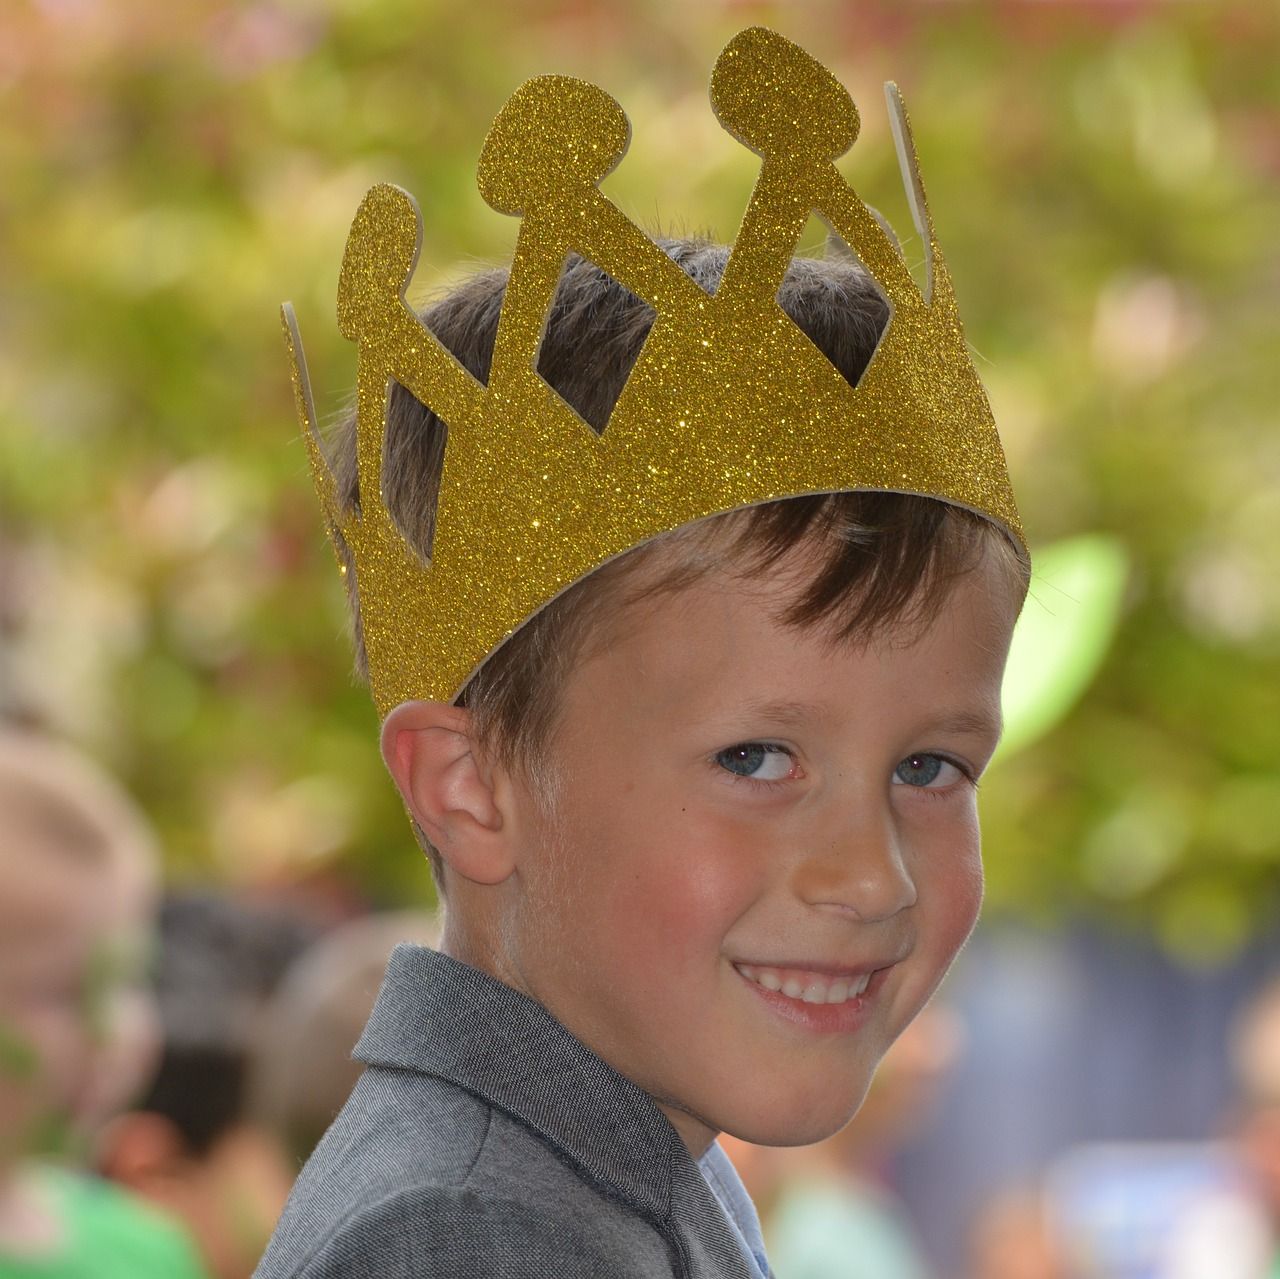 Child wearing a glittery gold crown